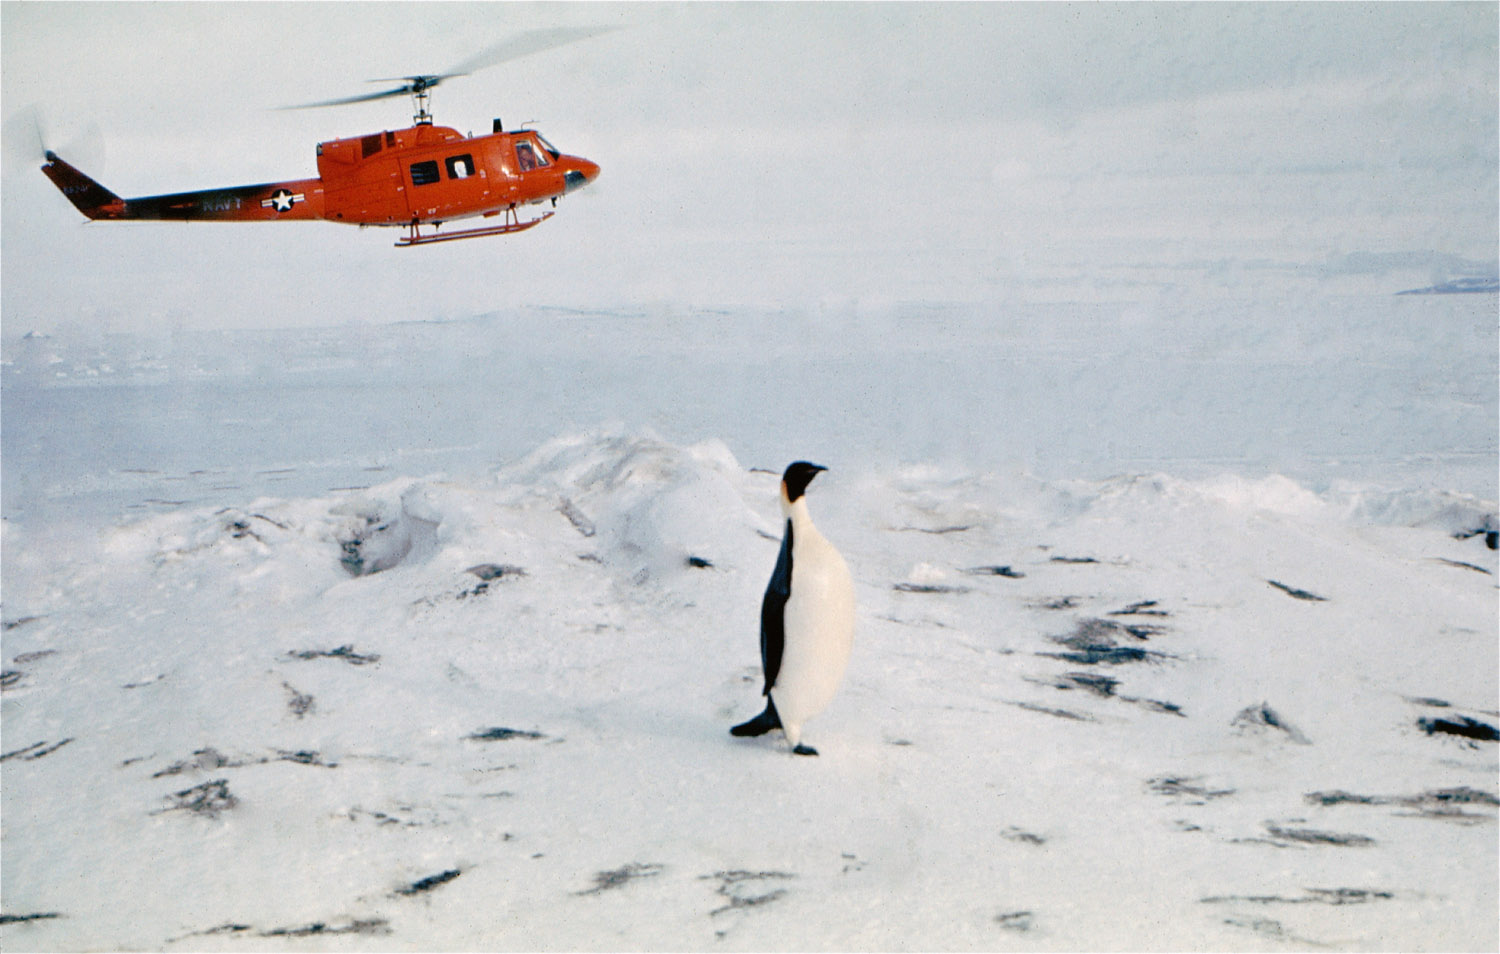 Antarctica Aircraft - Helicopter and Emperor Penguin